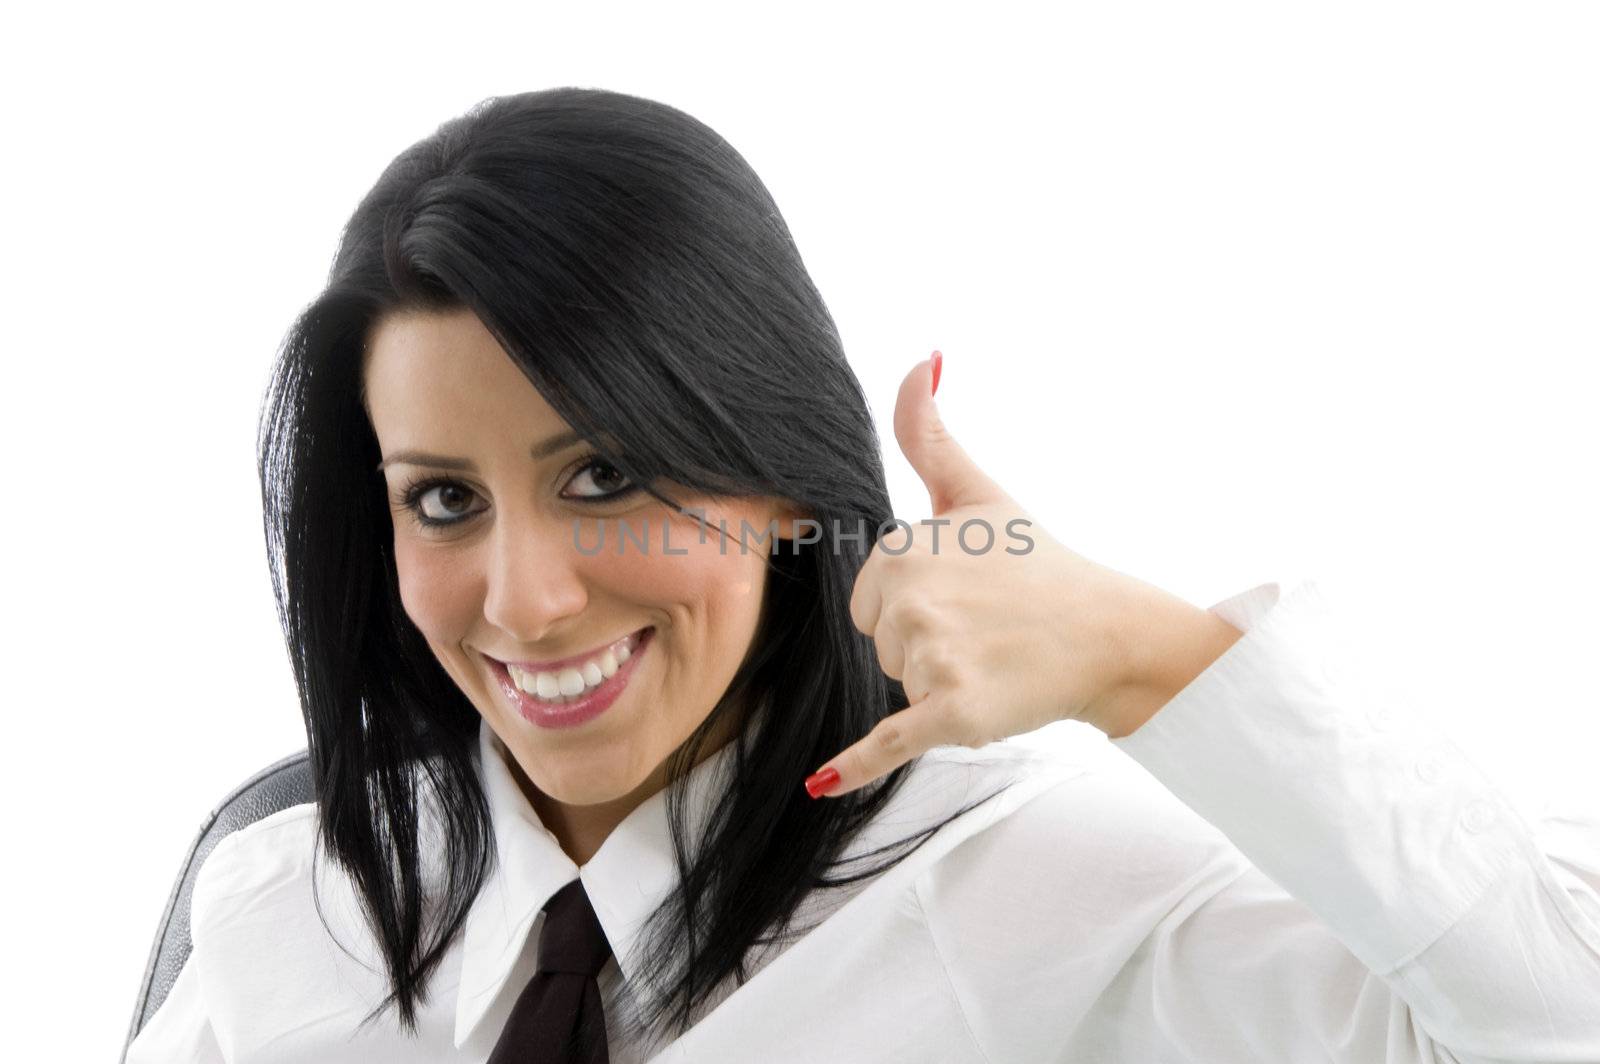 woman showing telephonic hand gesture by imagerymajestic